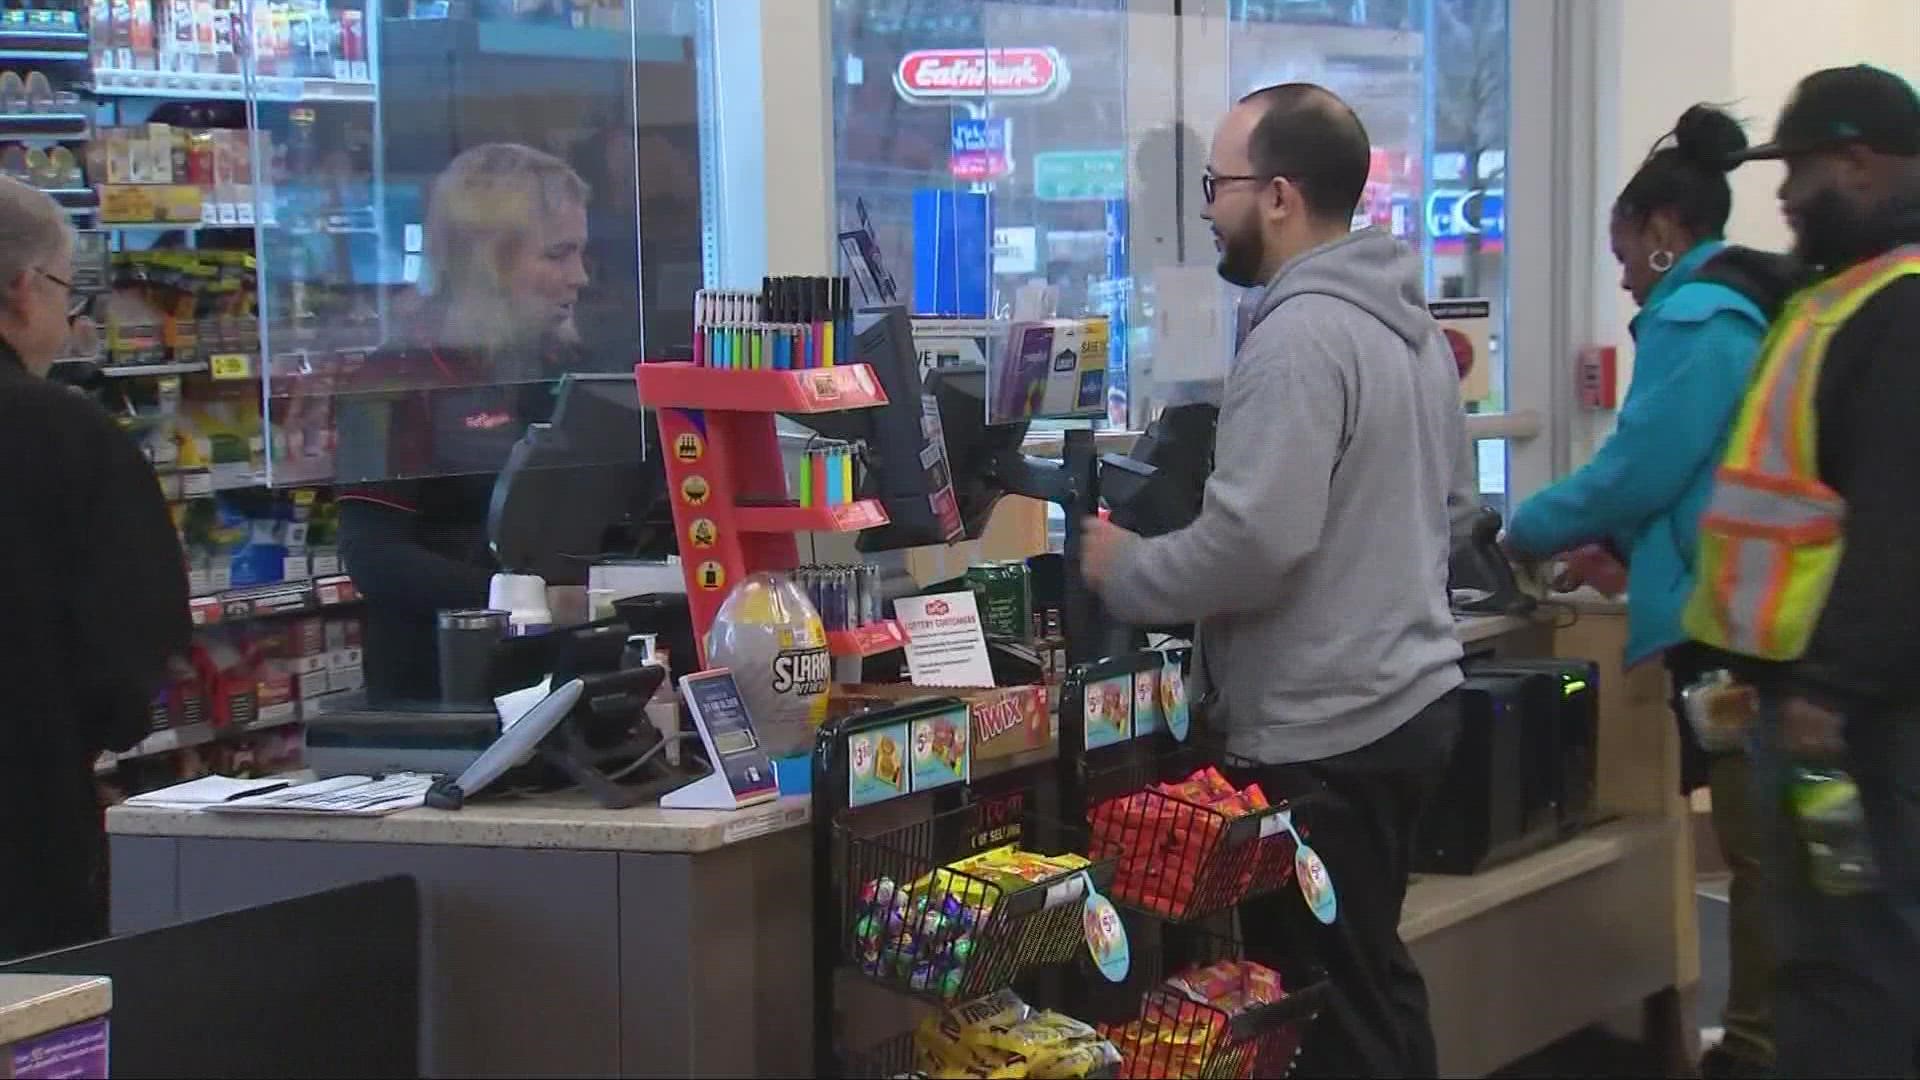 It's the second-largest Mega Millions jackpot and fourth-largest lottery prize in U.S. history.